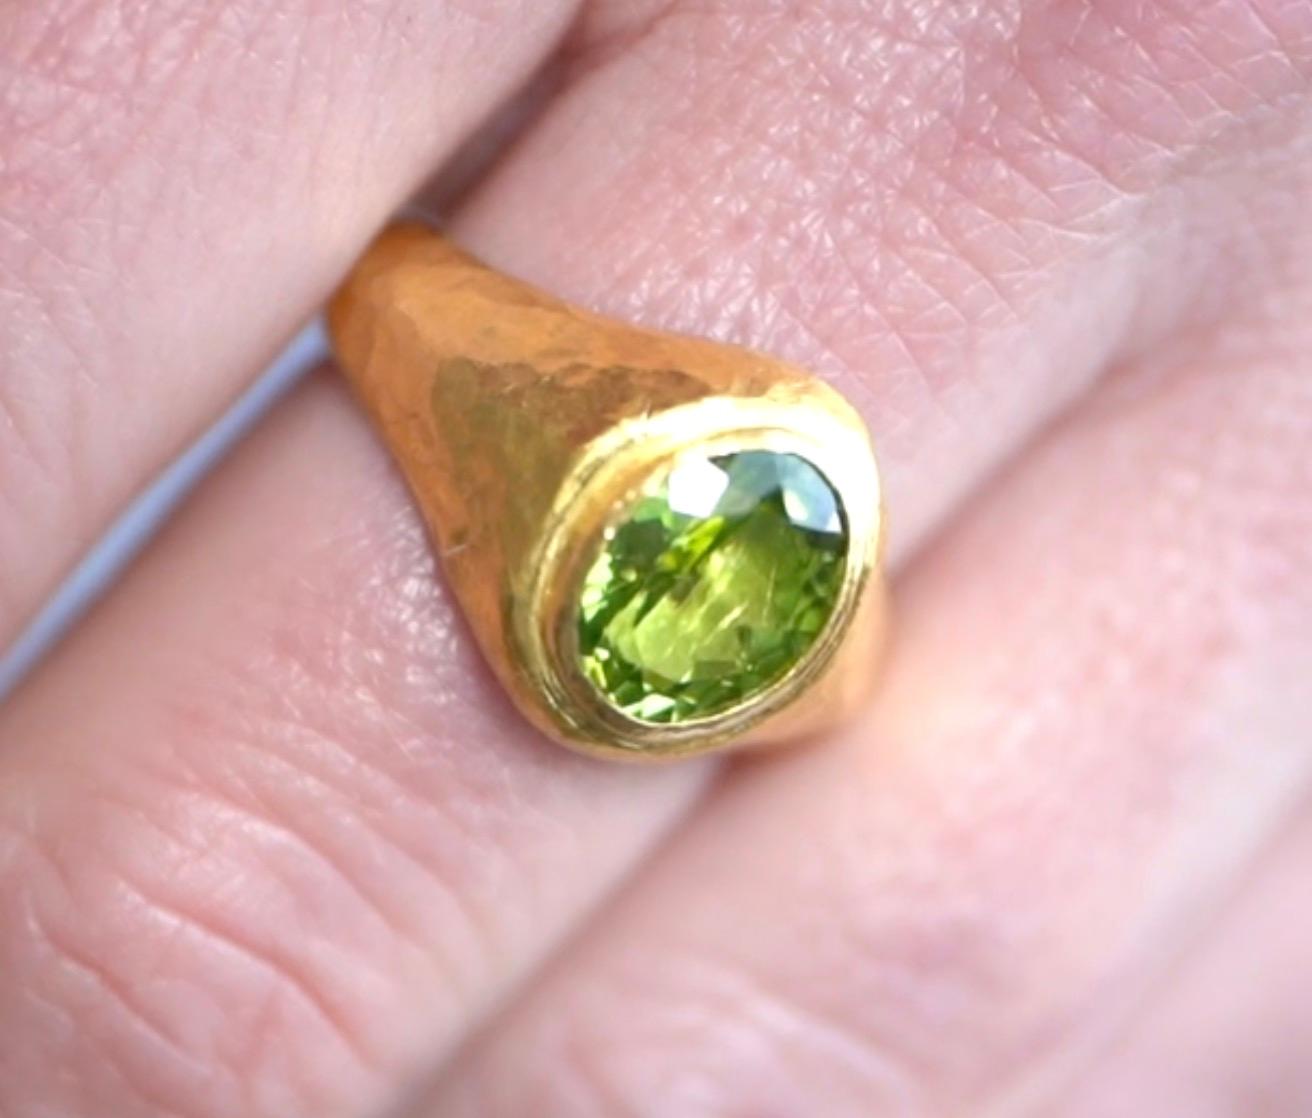 2.7ct Oval Bright Green Peridot Signet Ring with 24kt Gold and Silver by Prehistoric Works of Istanbul, Turkey. Size 6 US.